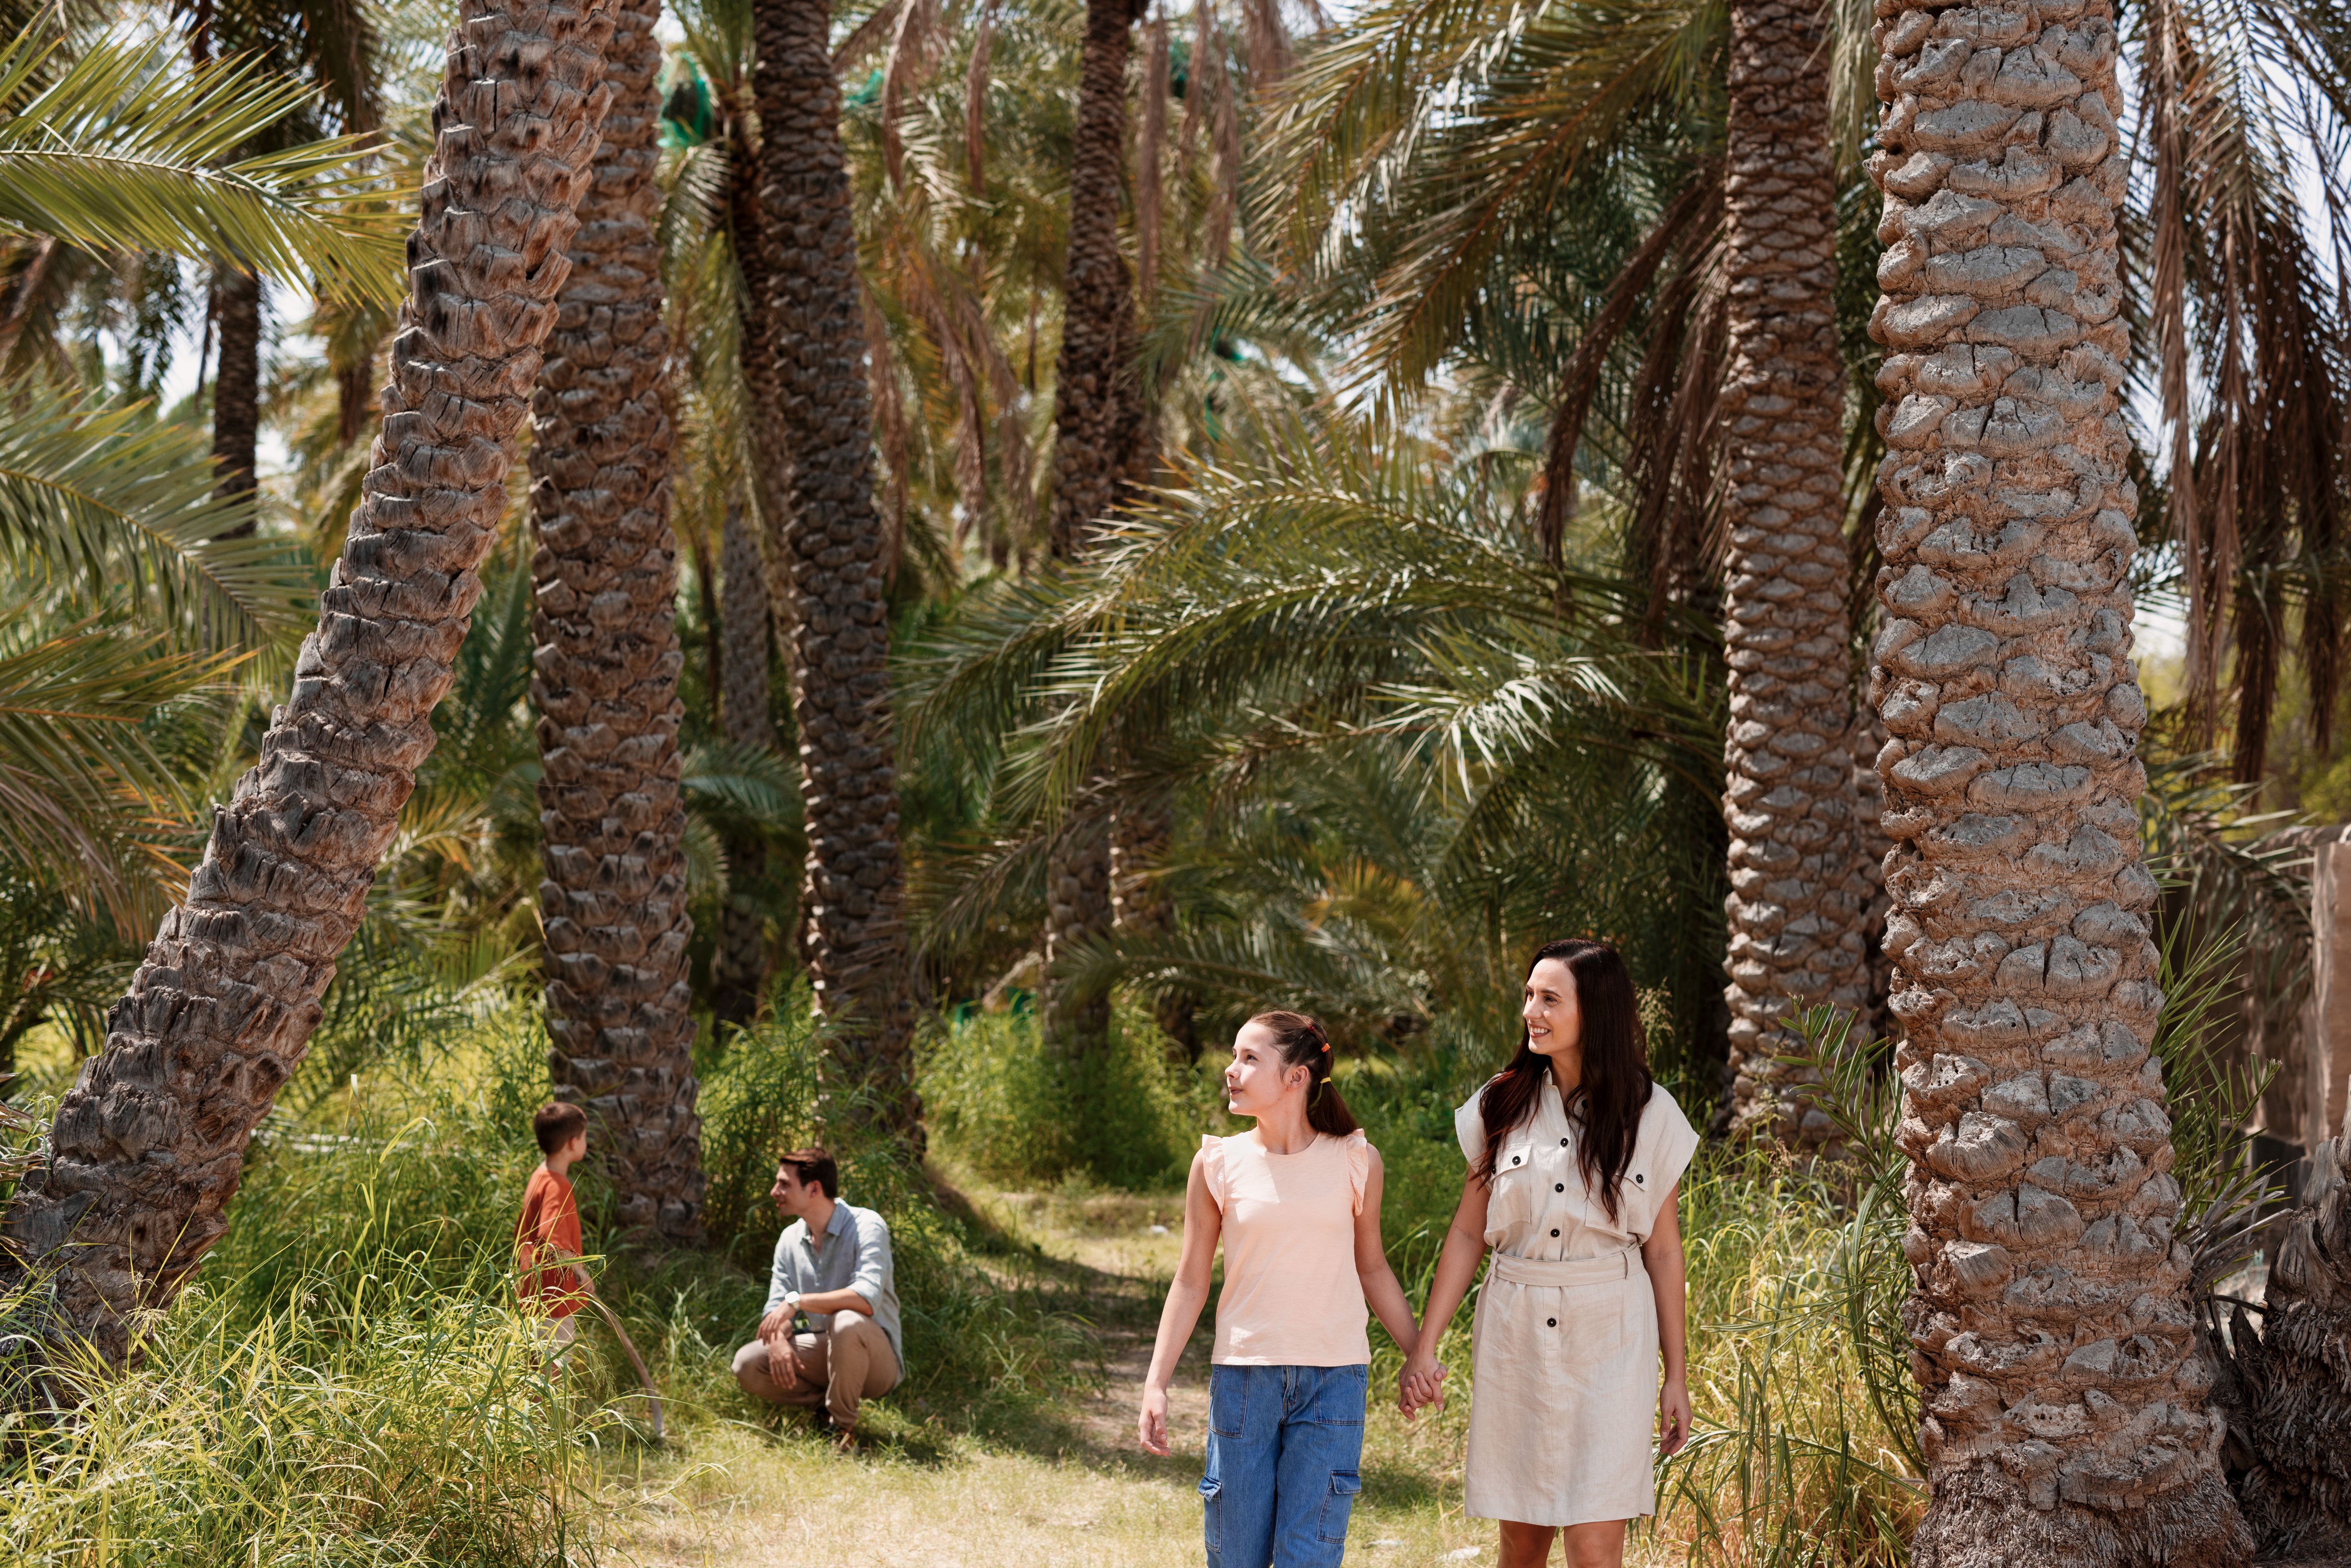 Western family enjoying their time in a lush green oasis in Al Ain